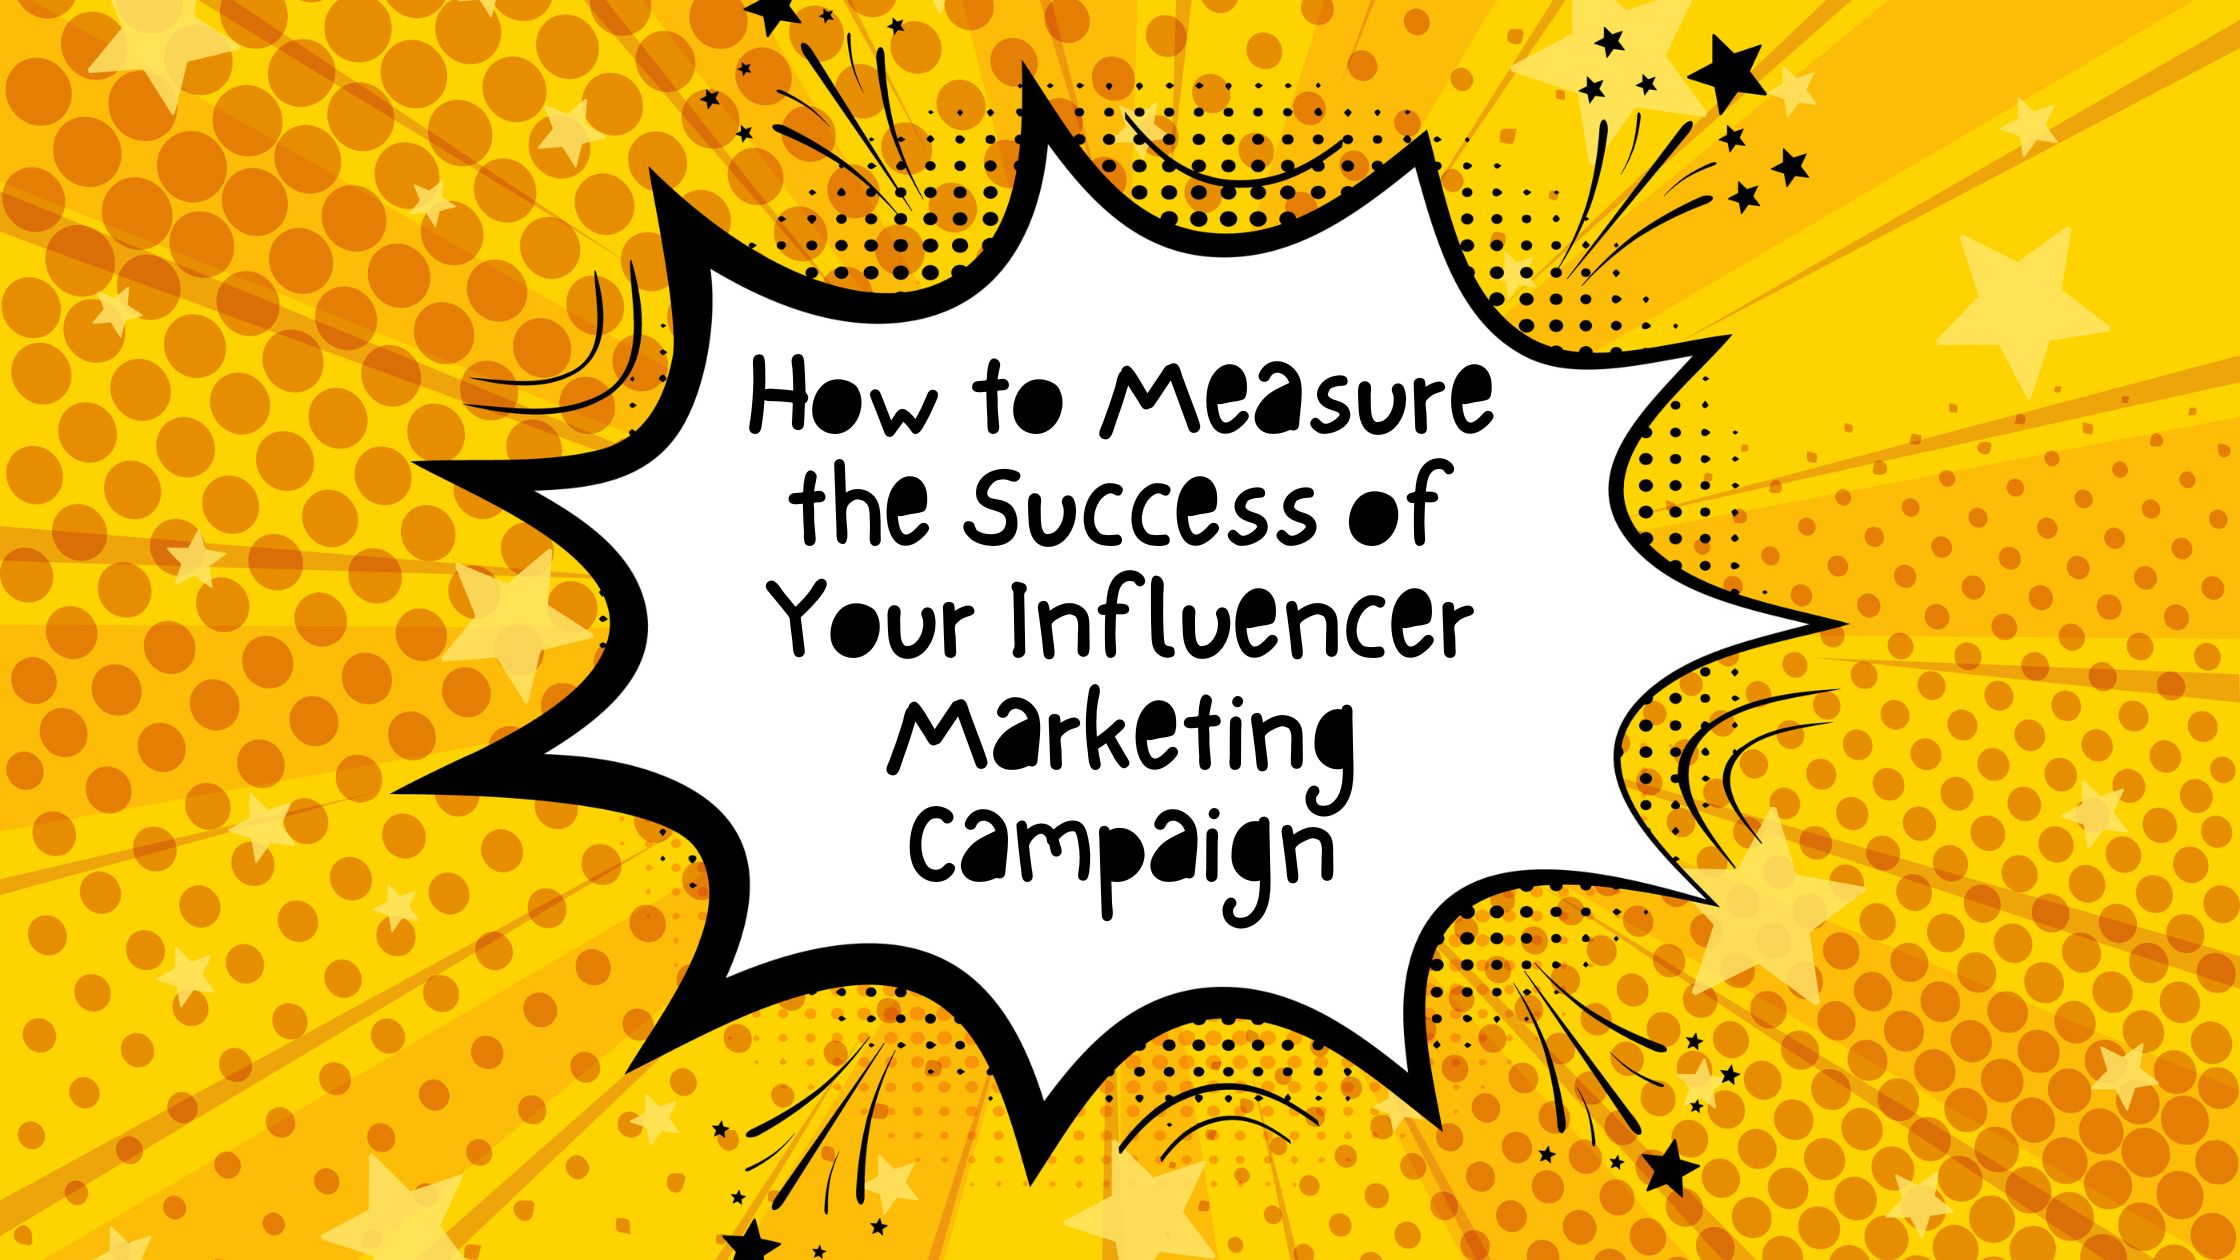 How to measure the success of your influencer marketing campaign